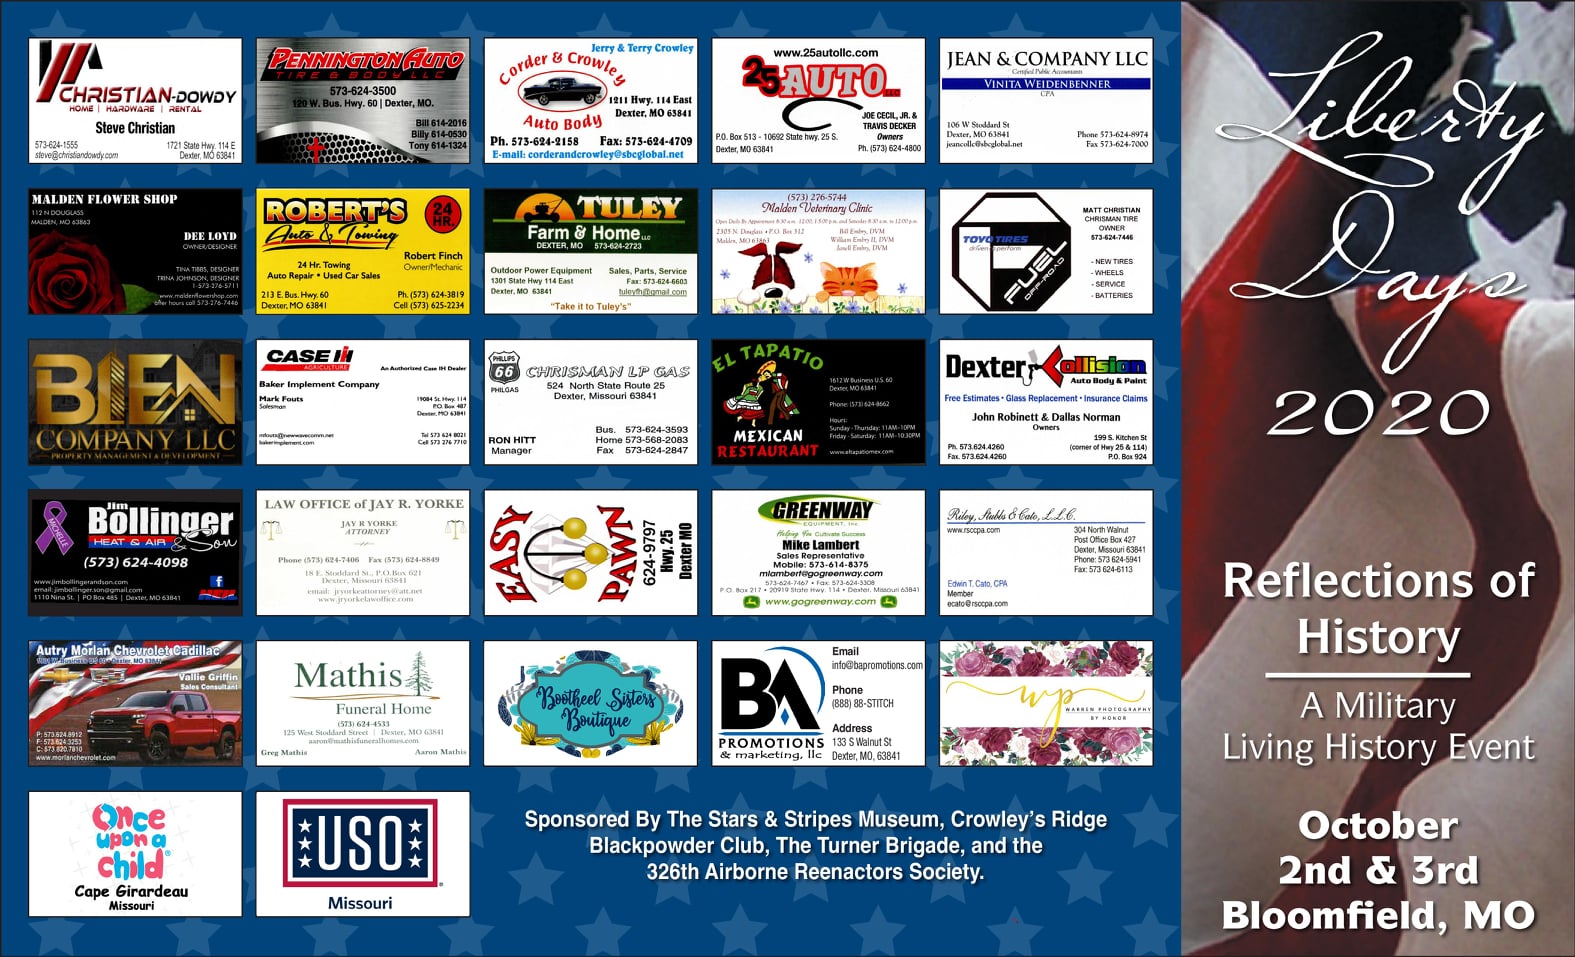 Liberty Days 2020 Brochure with Sponsors